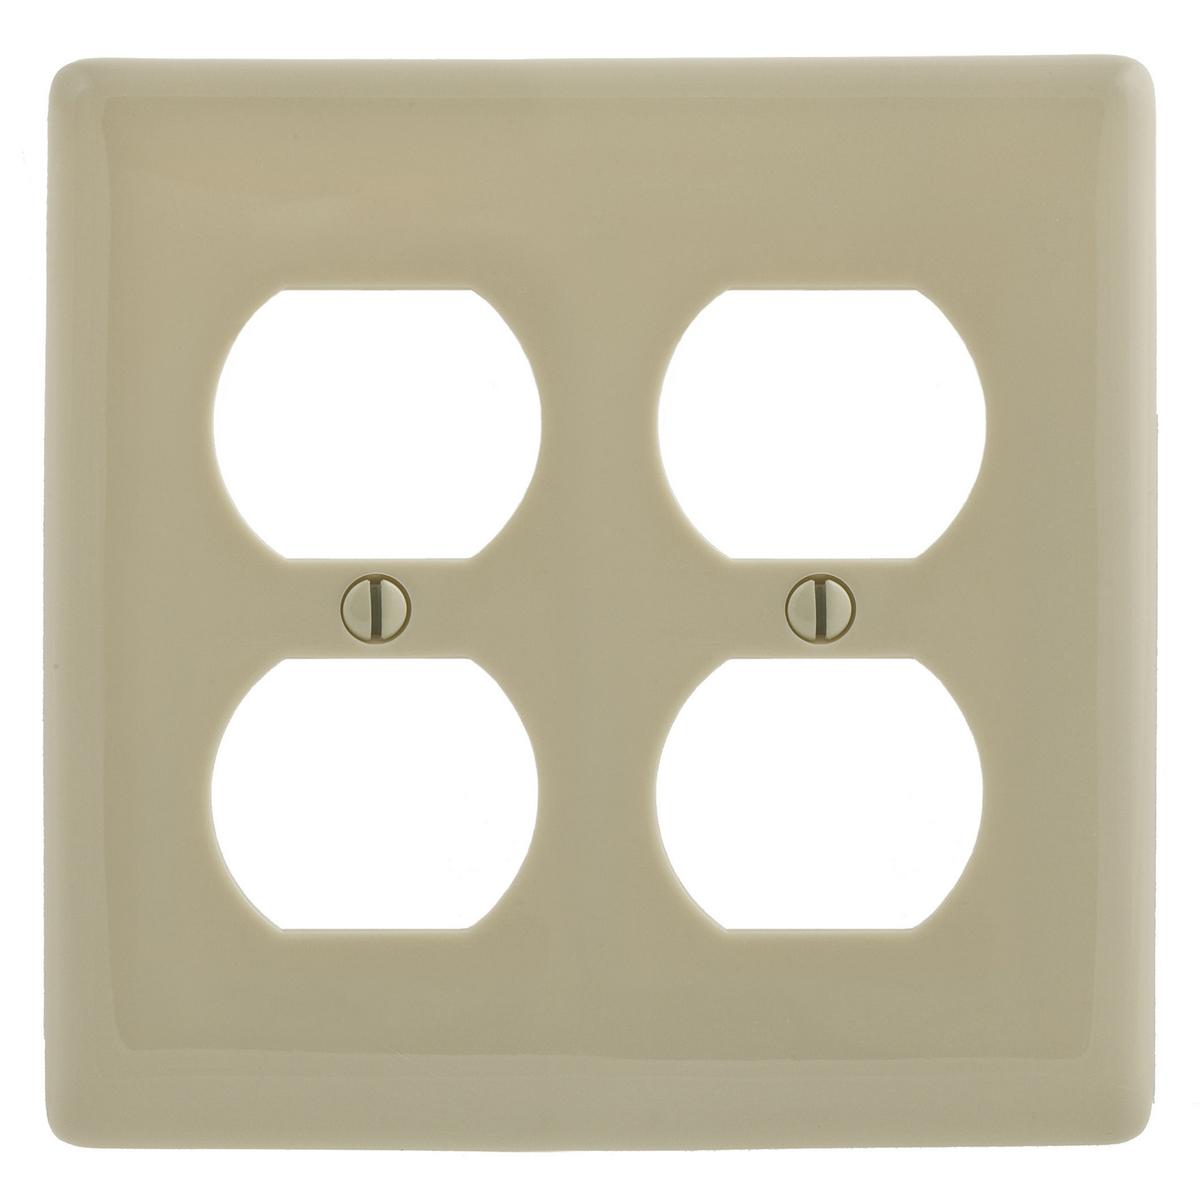 Hubbell NP82I Wallplates and Box Covers, Wallplate, Nylon, 2-Gang, 2) Duplex, Ivory  ; Reinforcement ribs for extra strength ; Captive screw feature holds mounting screw in place ; High-impact, self-extinguishing nylon material ; Standard Size is 1/8" larger to give yo